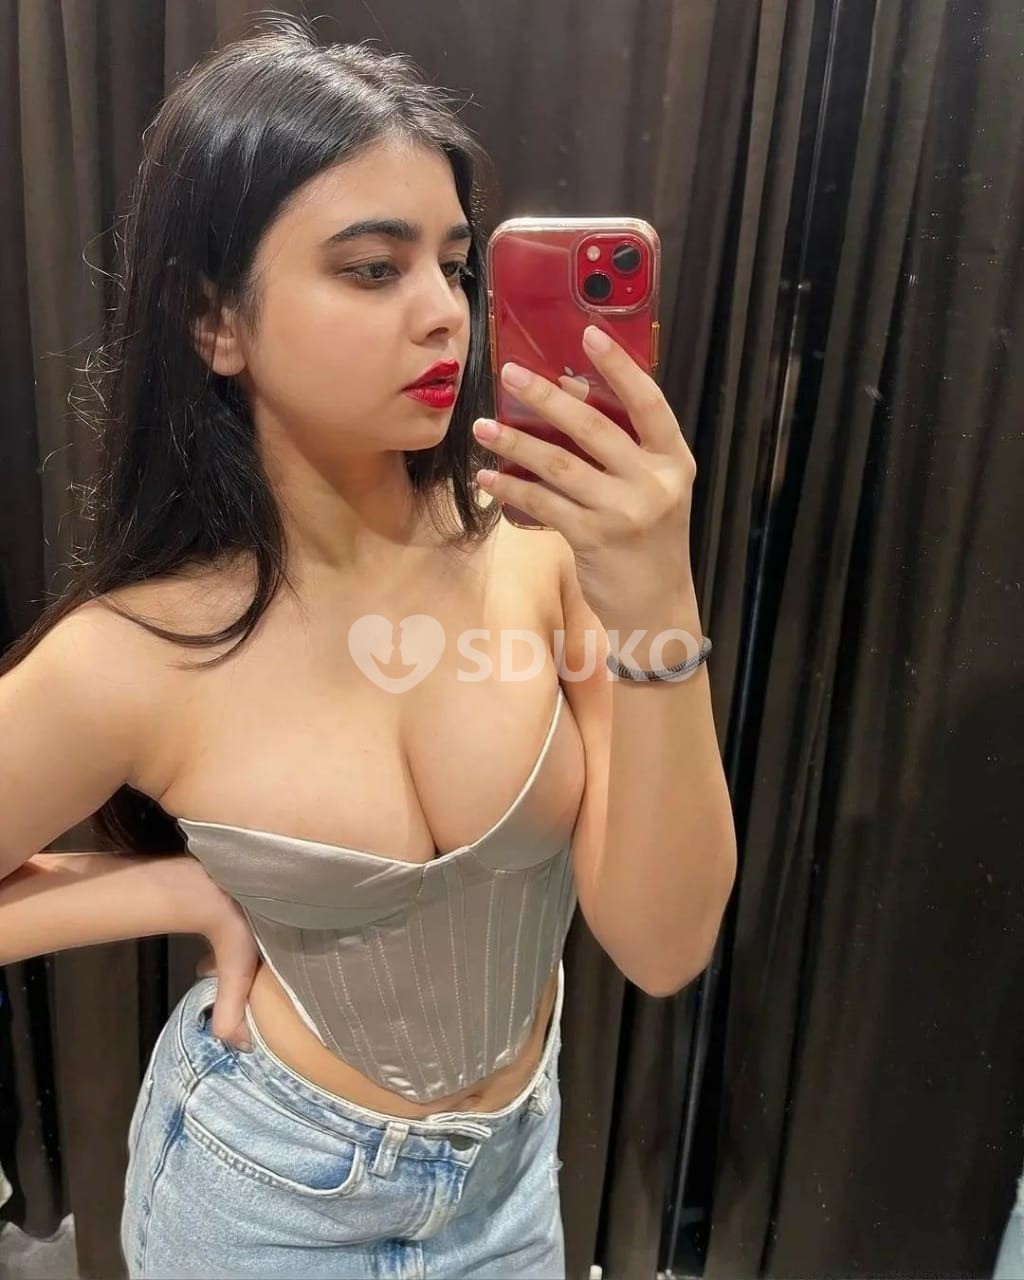 HEBBAL VIP TODAY LOW PRICE ;)ESCORT 🥰SERVICE 100% SAFE AND SECURE ANYTIME CALL ME 24 X 7 SERVICE AVAILABLE 100% SAFE